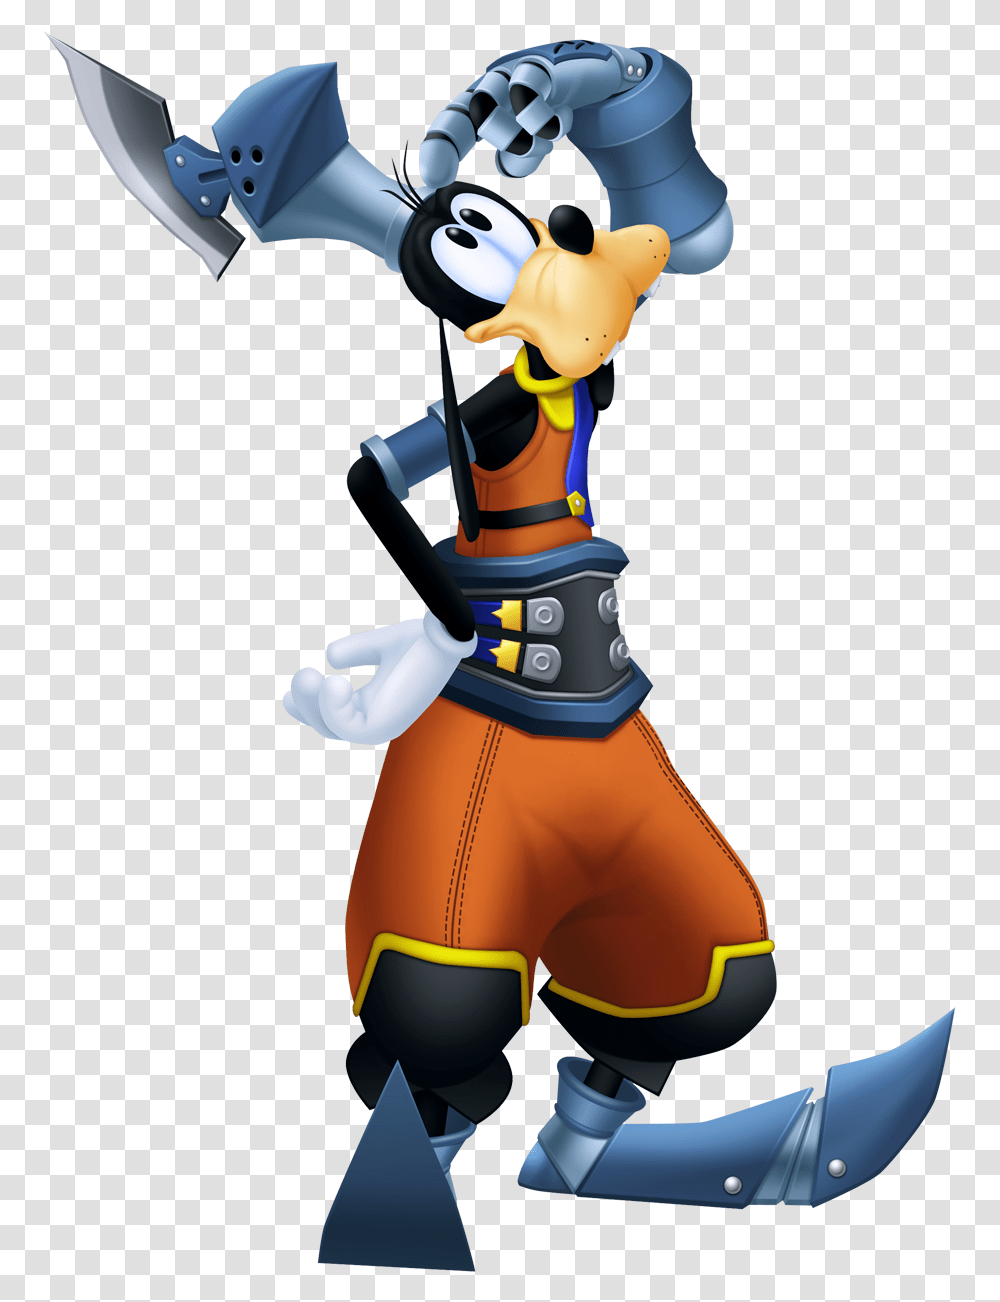 Goofy Images Kingdom Hearts Re Coded, Toy, Clothing, Apparel, Ninja Transparent Png